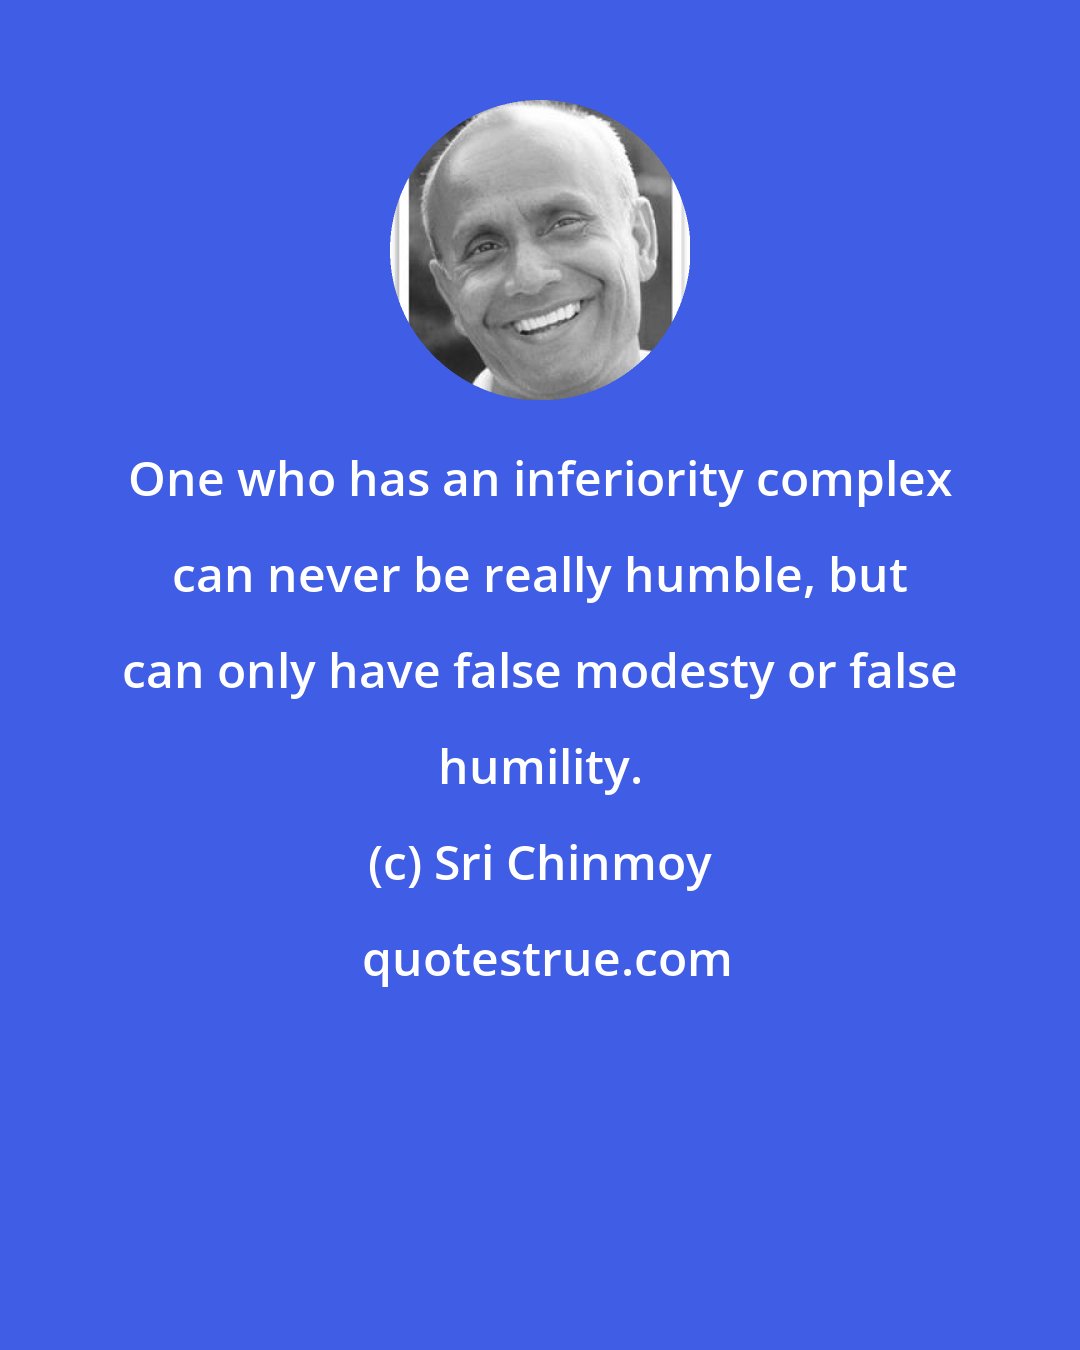 Sri Chinmoy: One who has an inferiority complex can never be really humble, but can only have false modesty or false humility.